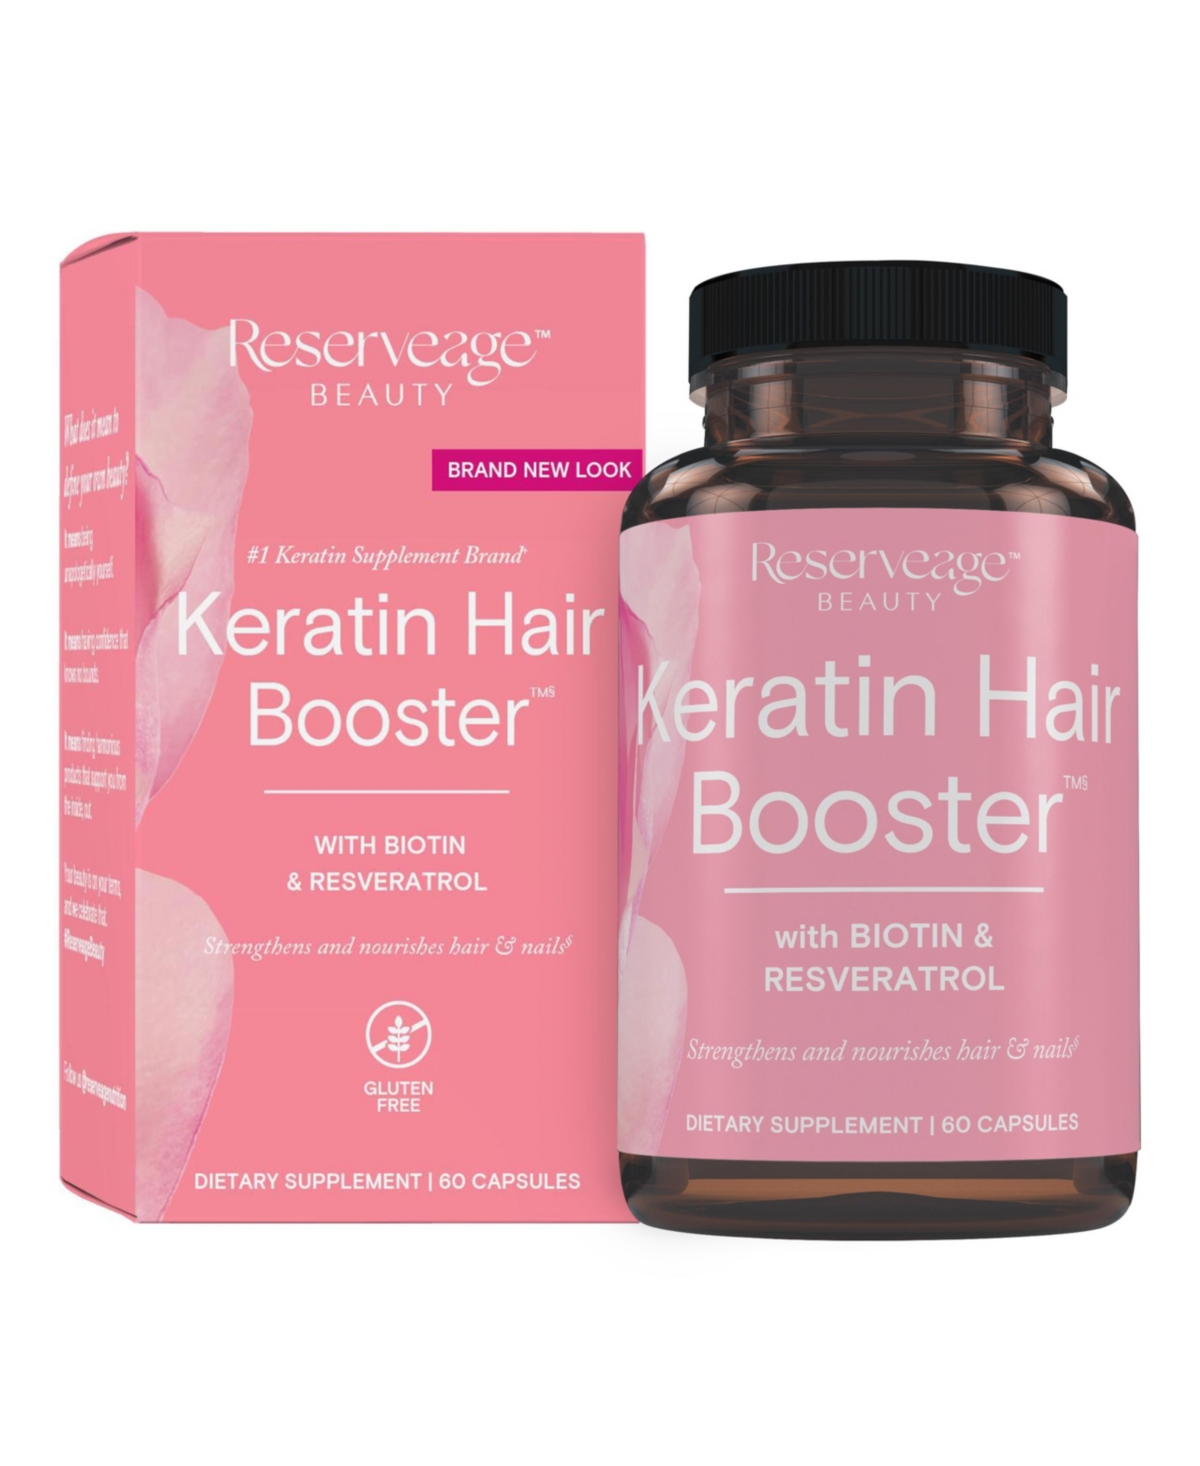 Keratin Hair Booster, Hair and Nails Supplement, Supports Healthy Thickness and Shine with Biotin, 60 Capsules (30 Servings)